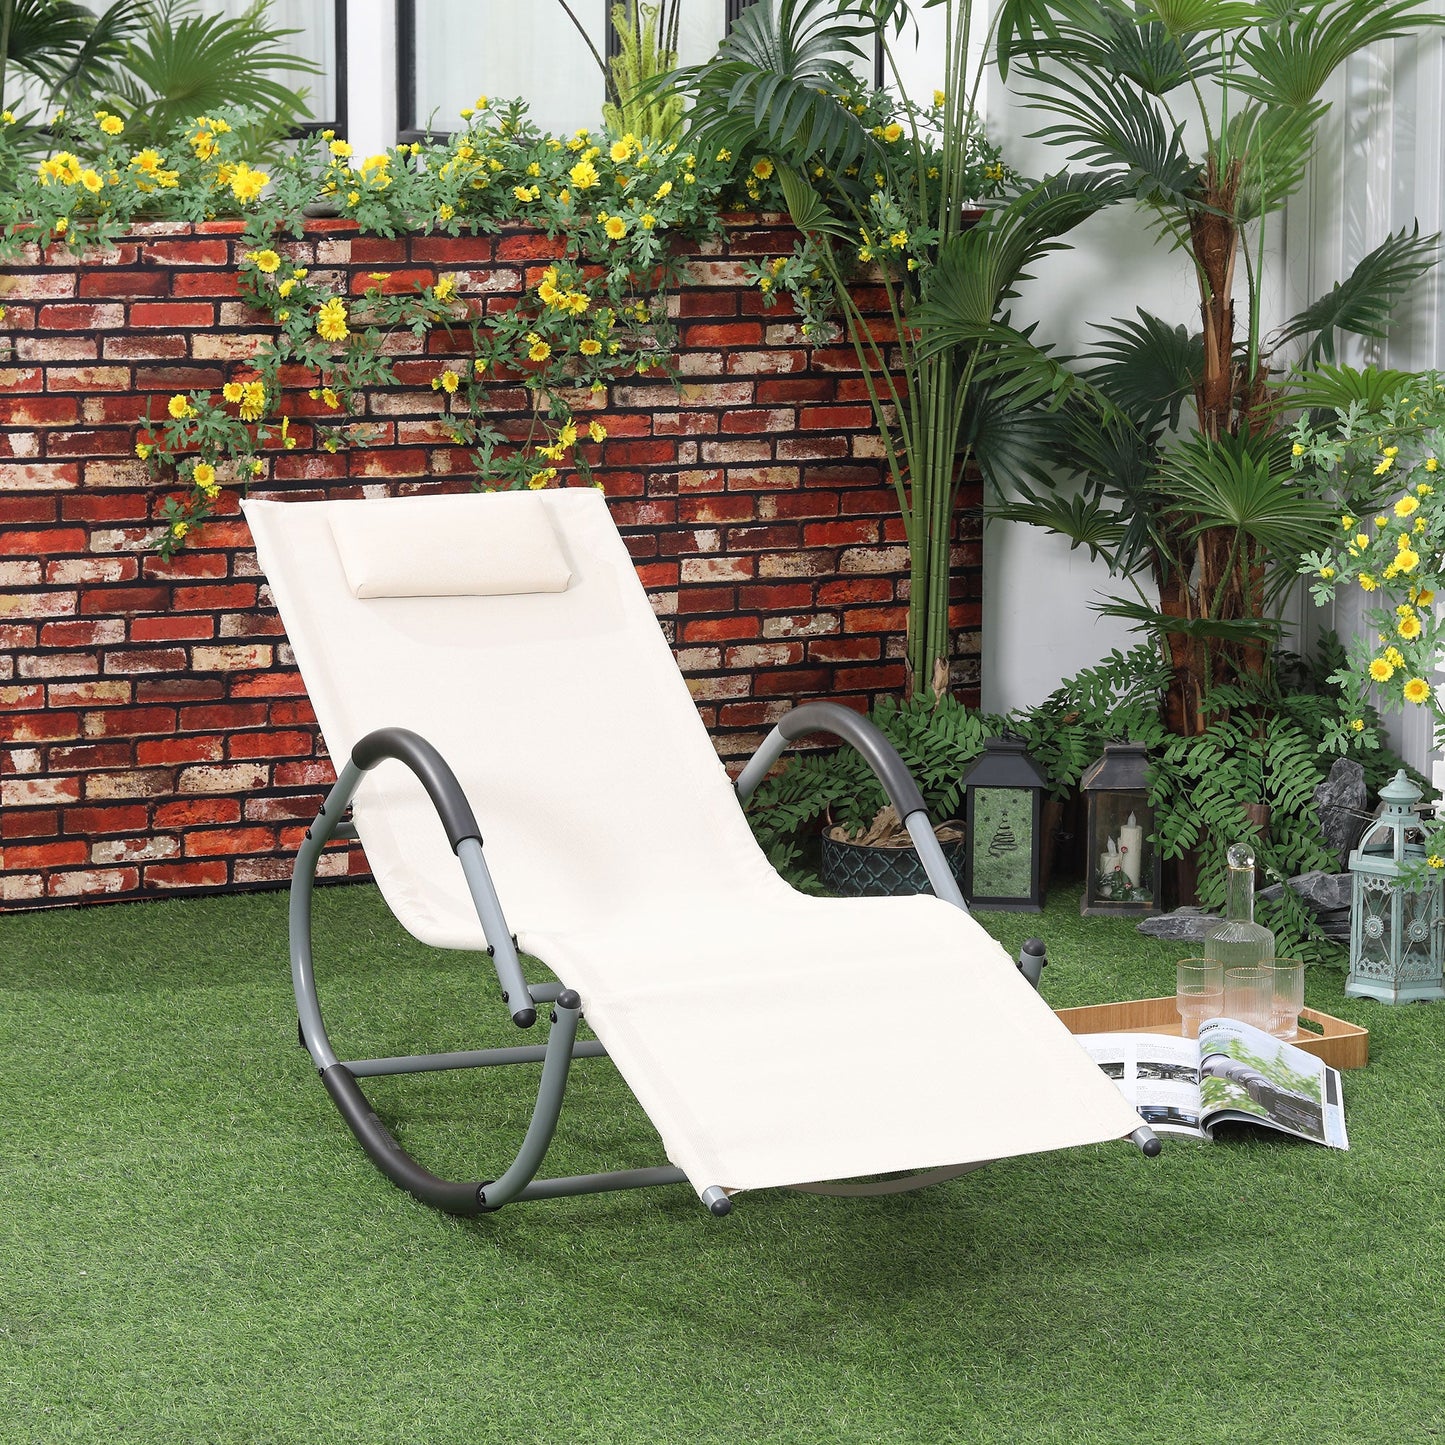 Outdoor and Garden-Rocking Chair, Zero Gravity Patio Chaise Sun Lounger, Outdoor Rocker, UV Water Resistant with Pillow, for Lawn, Garden - Beige - Outdoor Style Company